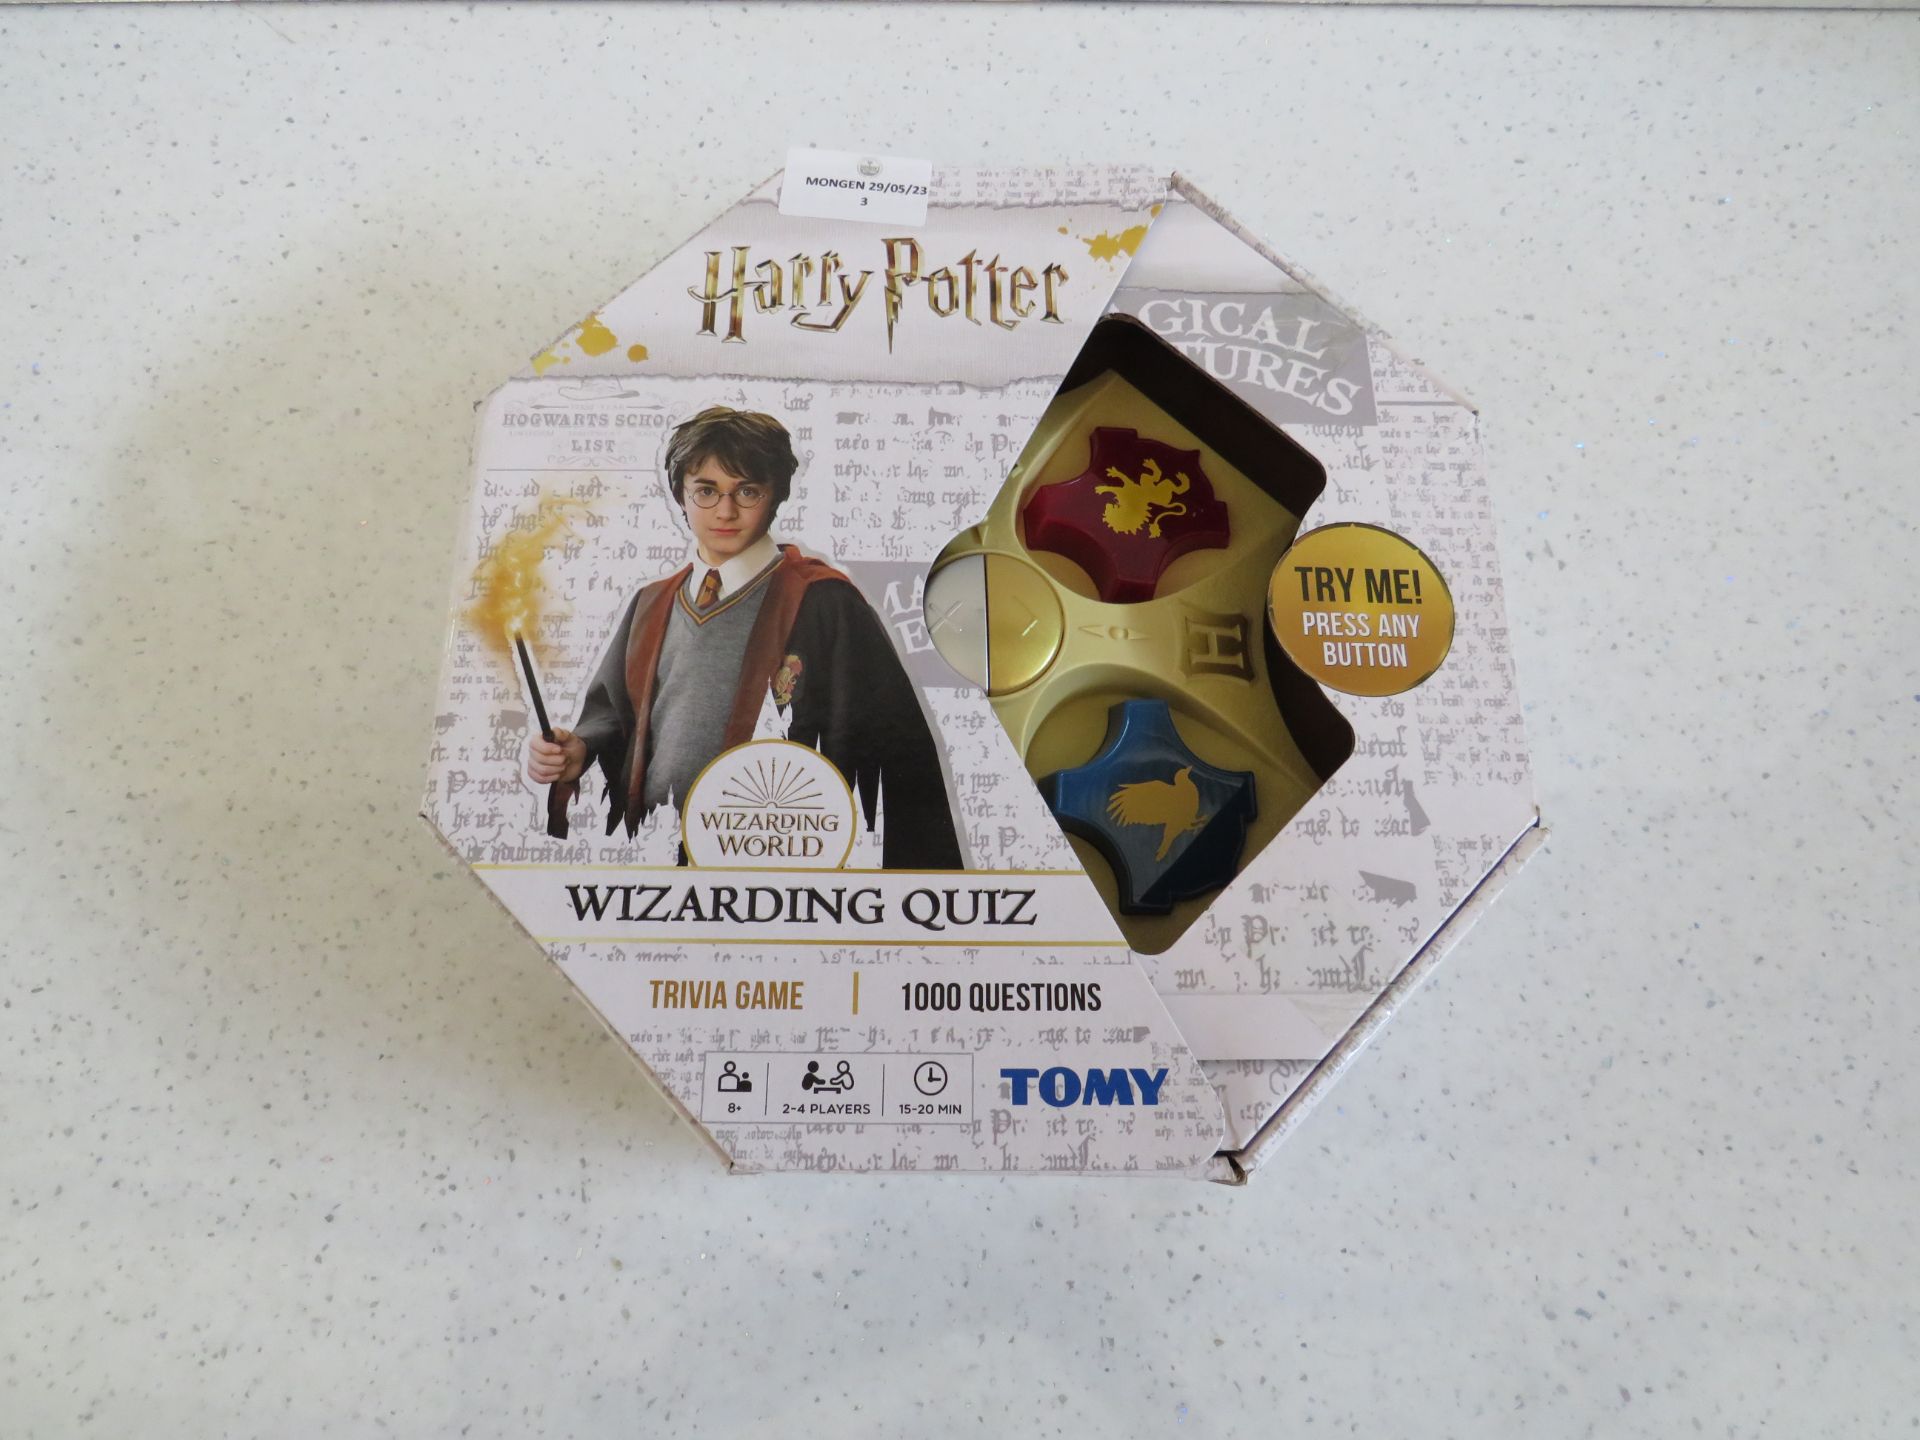 Wizarding World - Harry Potter 1000-Question Trivia Game - Tested Working & Boxed.